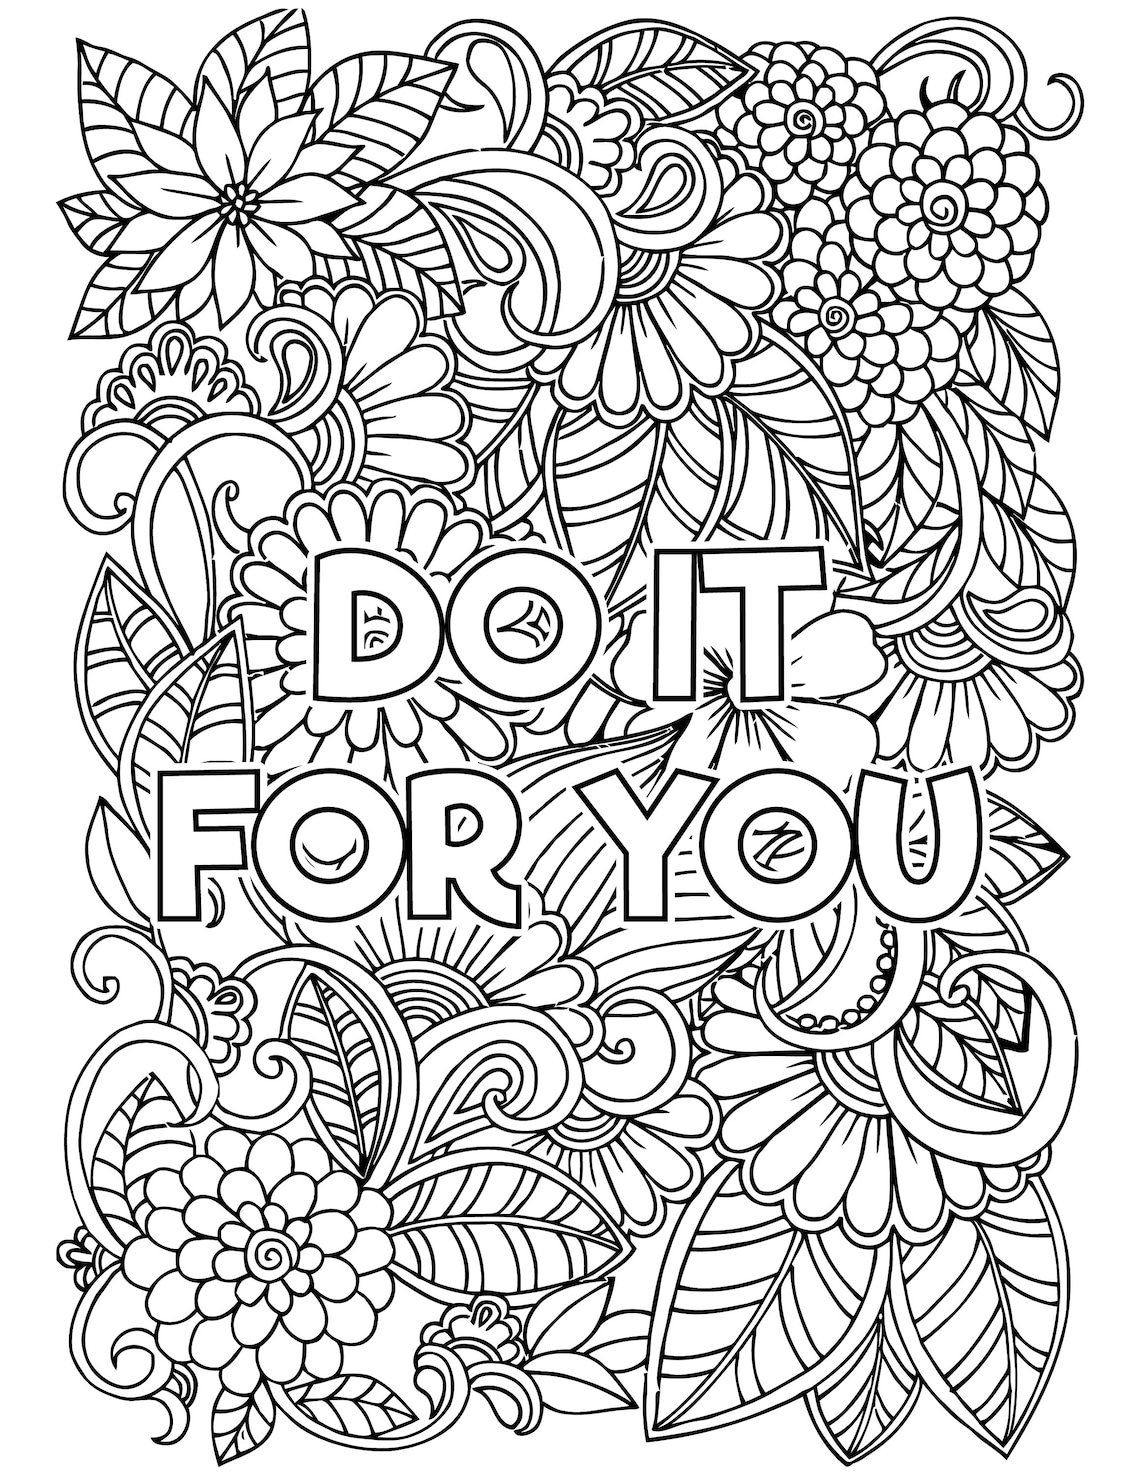 Colouring Pages Mandala Daily Affirmations - Etsy